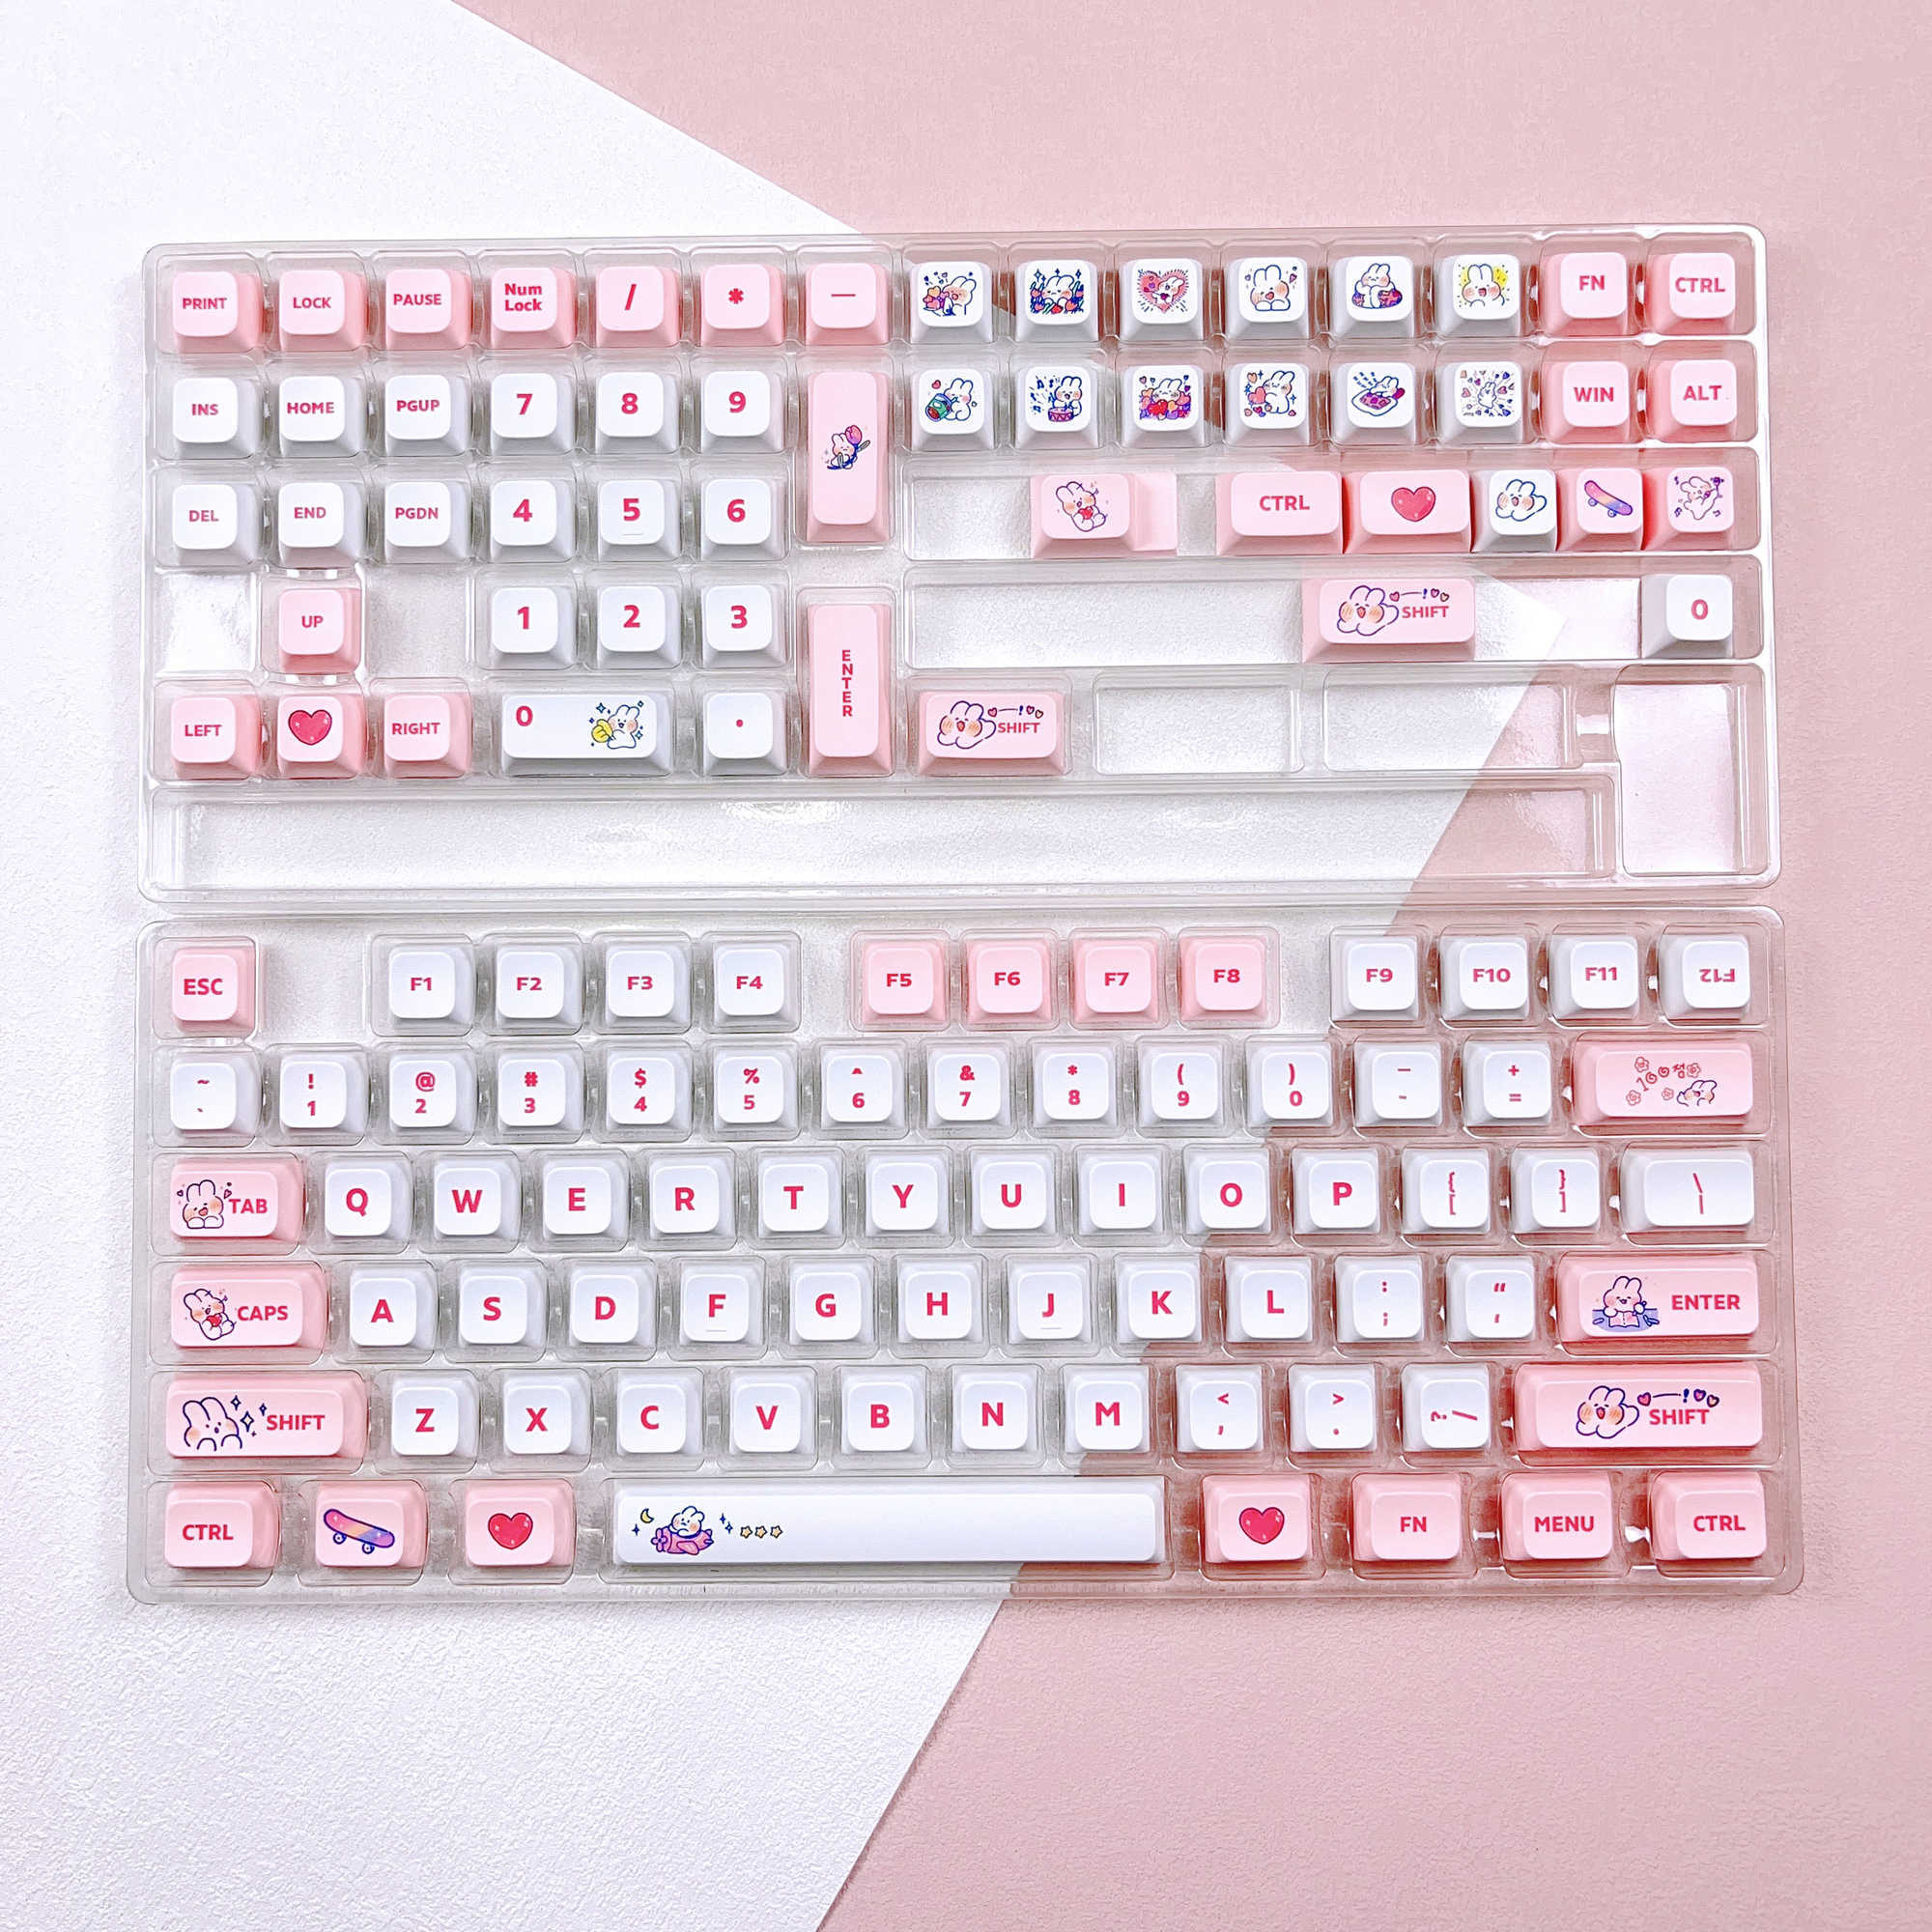 Keyboards 129 Keys XDA Profile PBT Pink Bunny Theme Cute Creative Keycap DYE-SUB Suitable For MX Switch Personality Mechanical Keyboard T230215